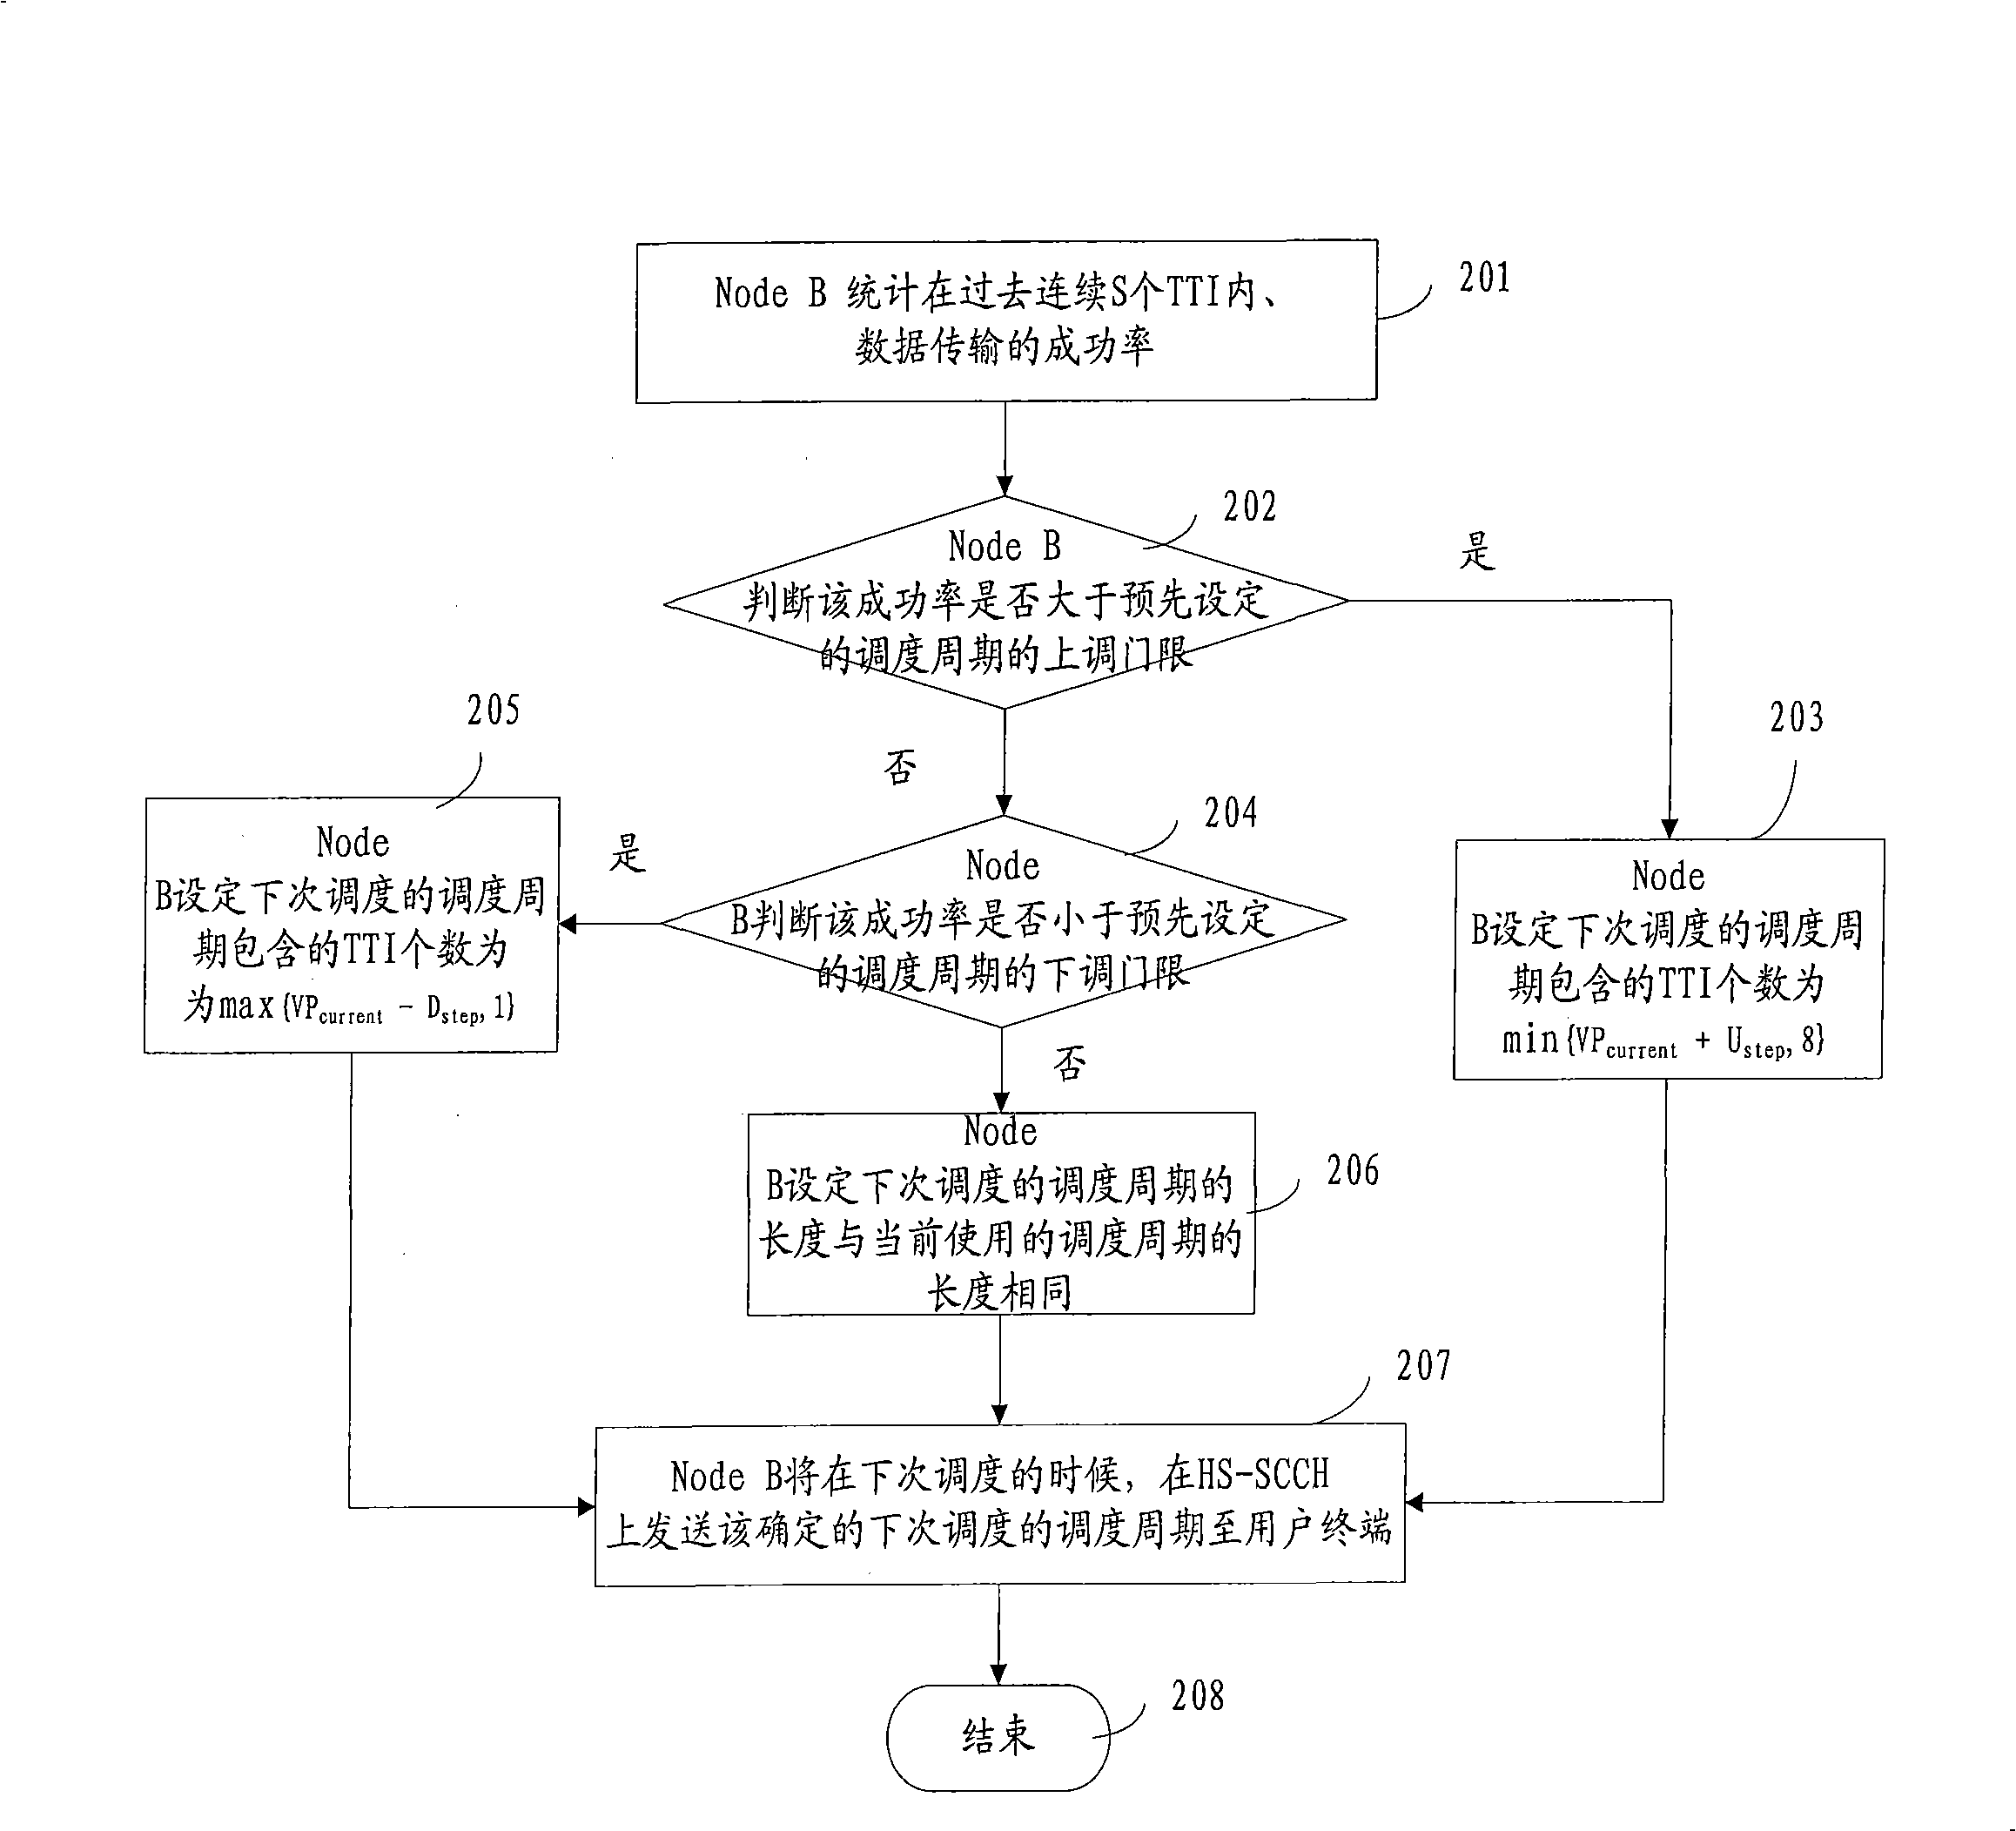 Method and system for scheduling HSDPA resource